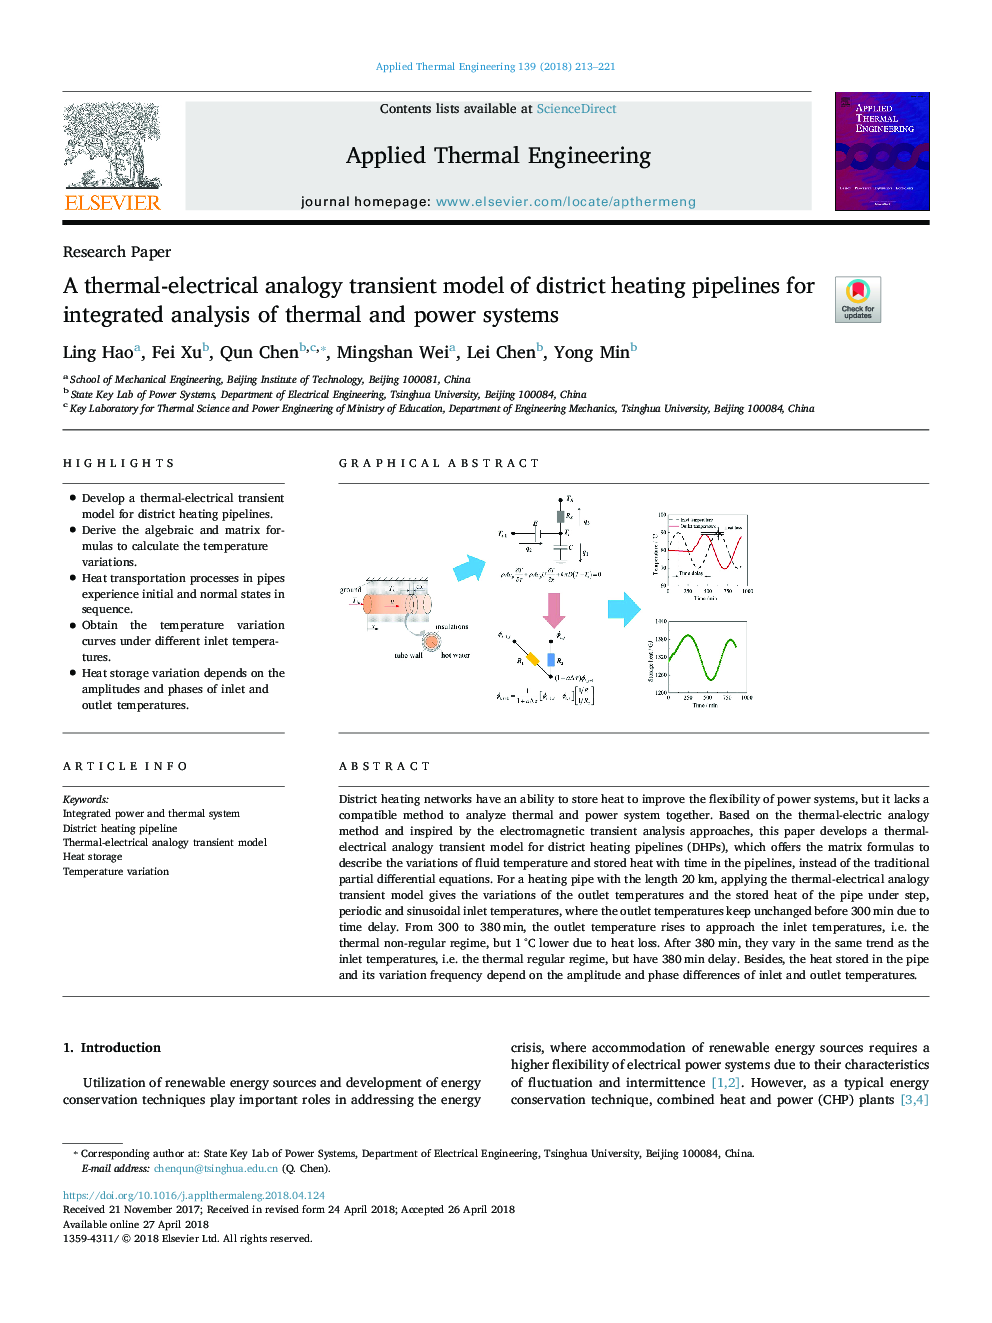 A thermal-electrical analogy transient model of district heating pipelines for integrated analysis of thermal and power systems